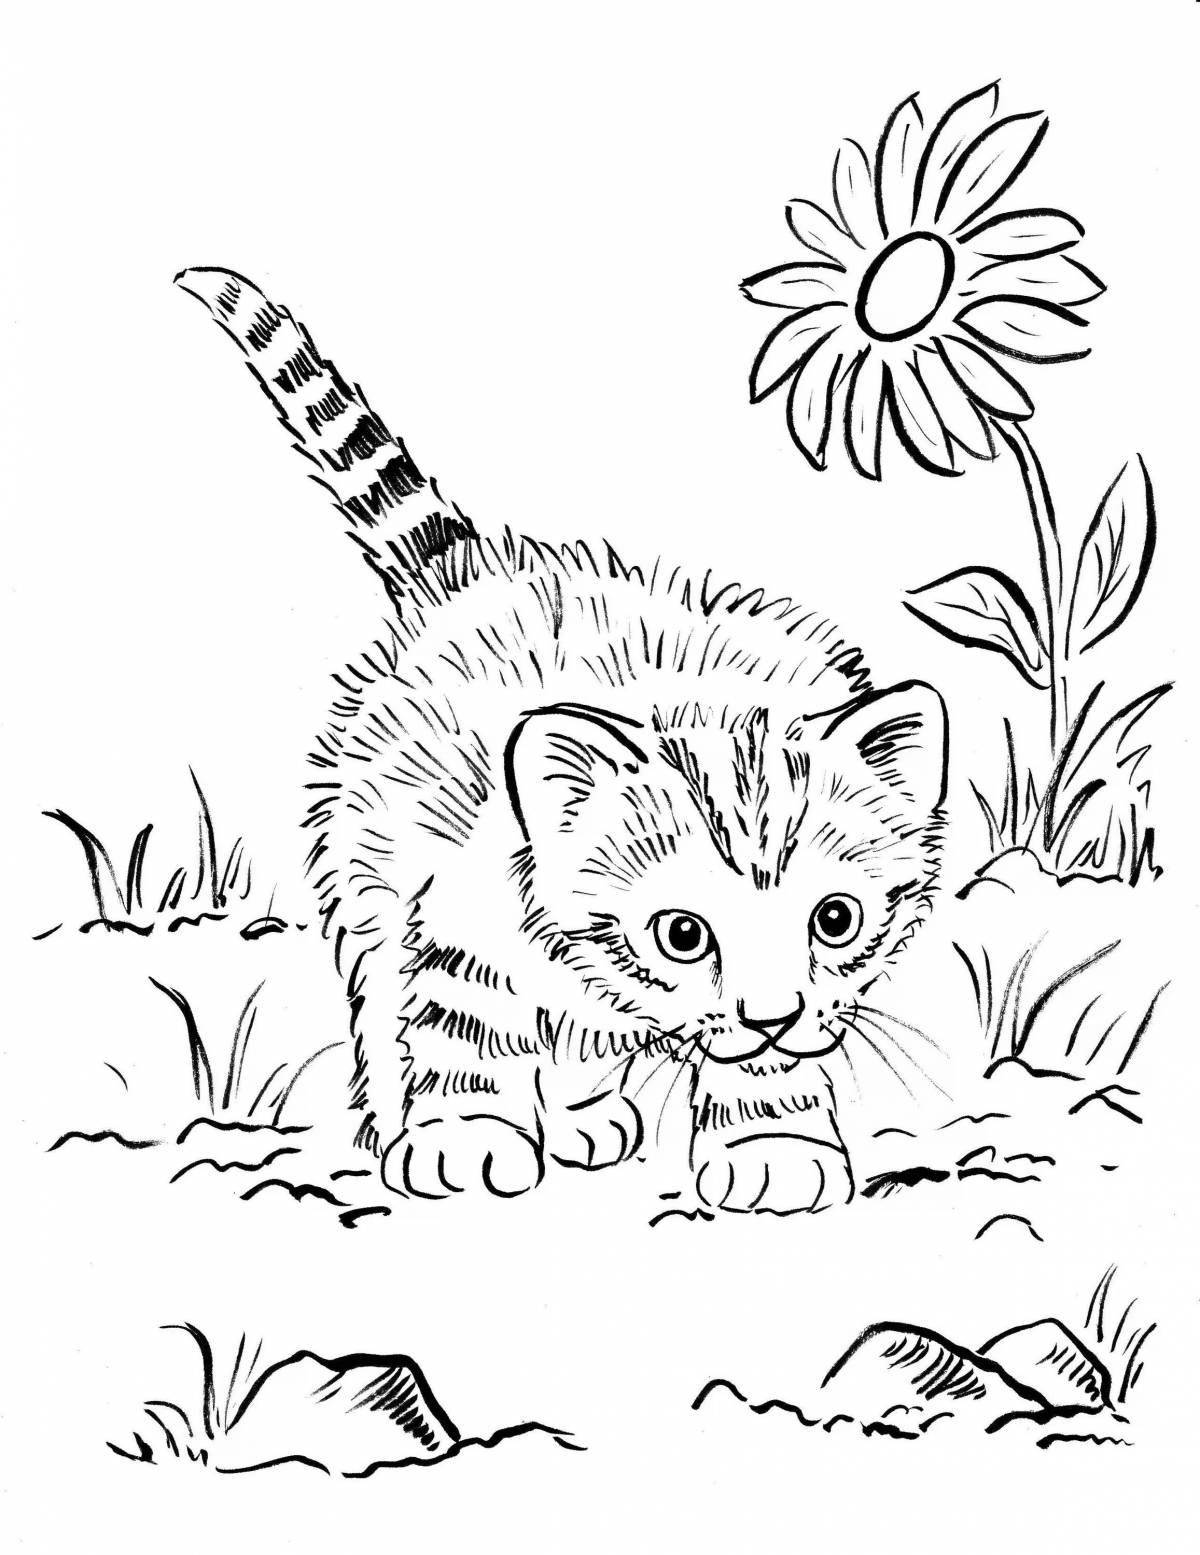 Cozy kitty coloring book